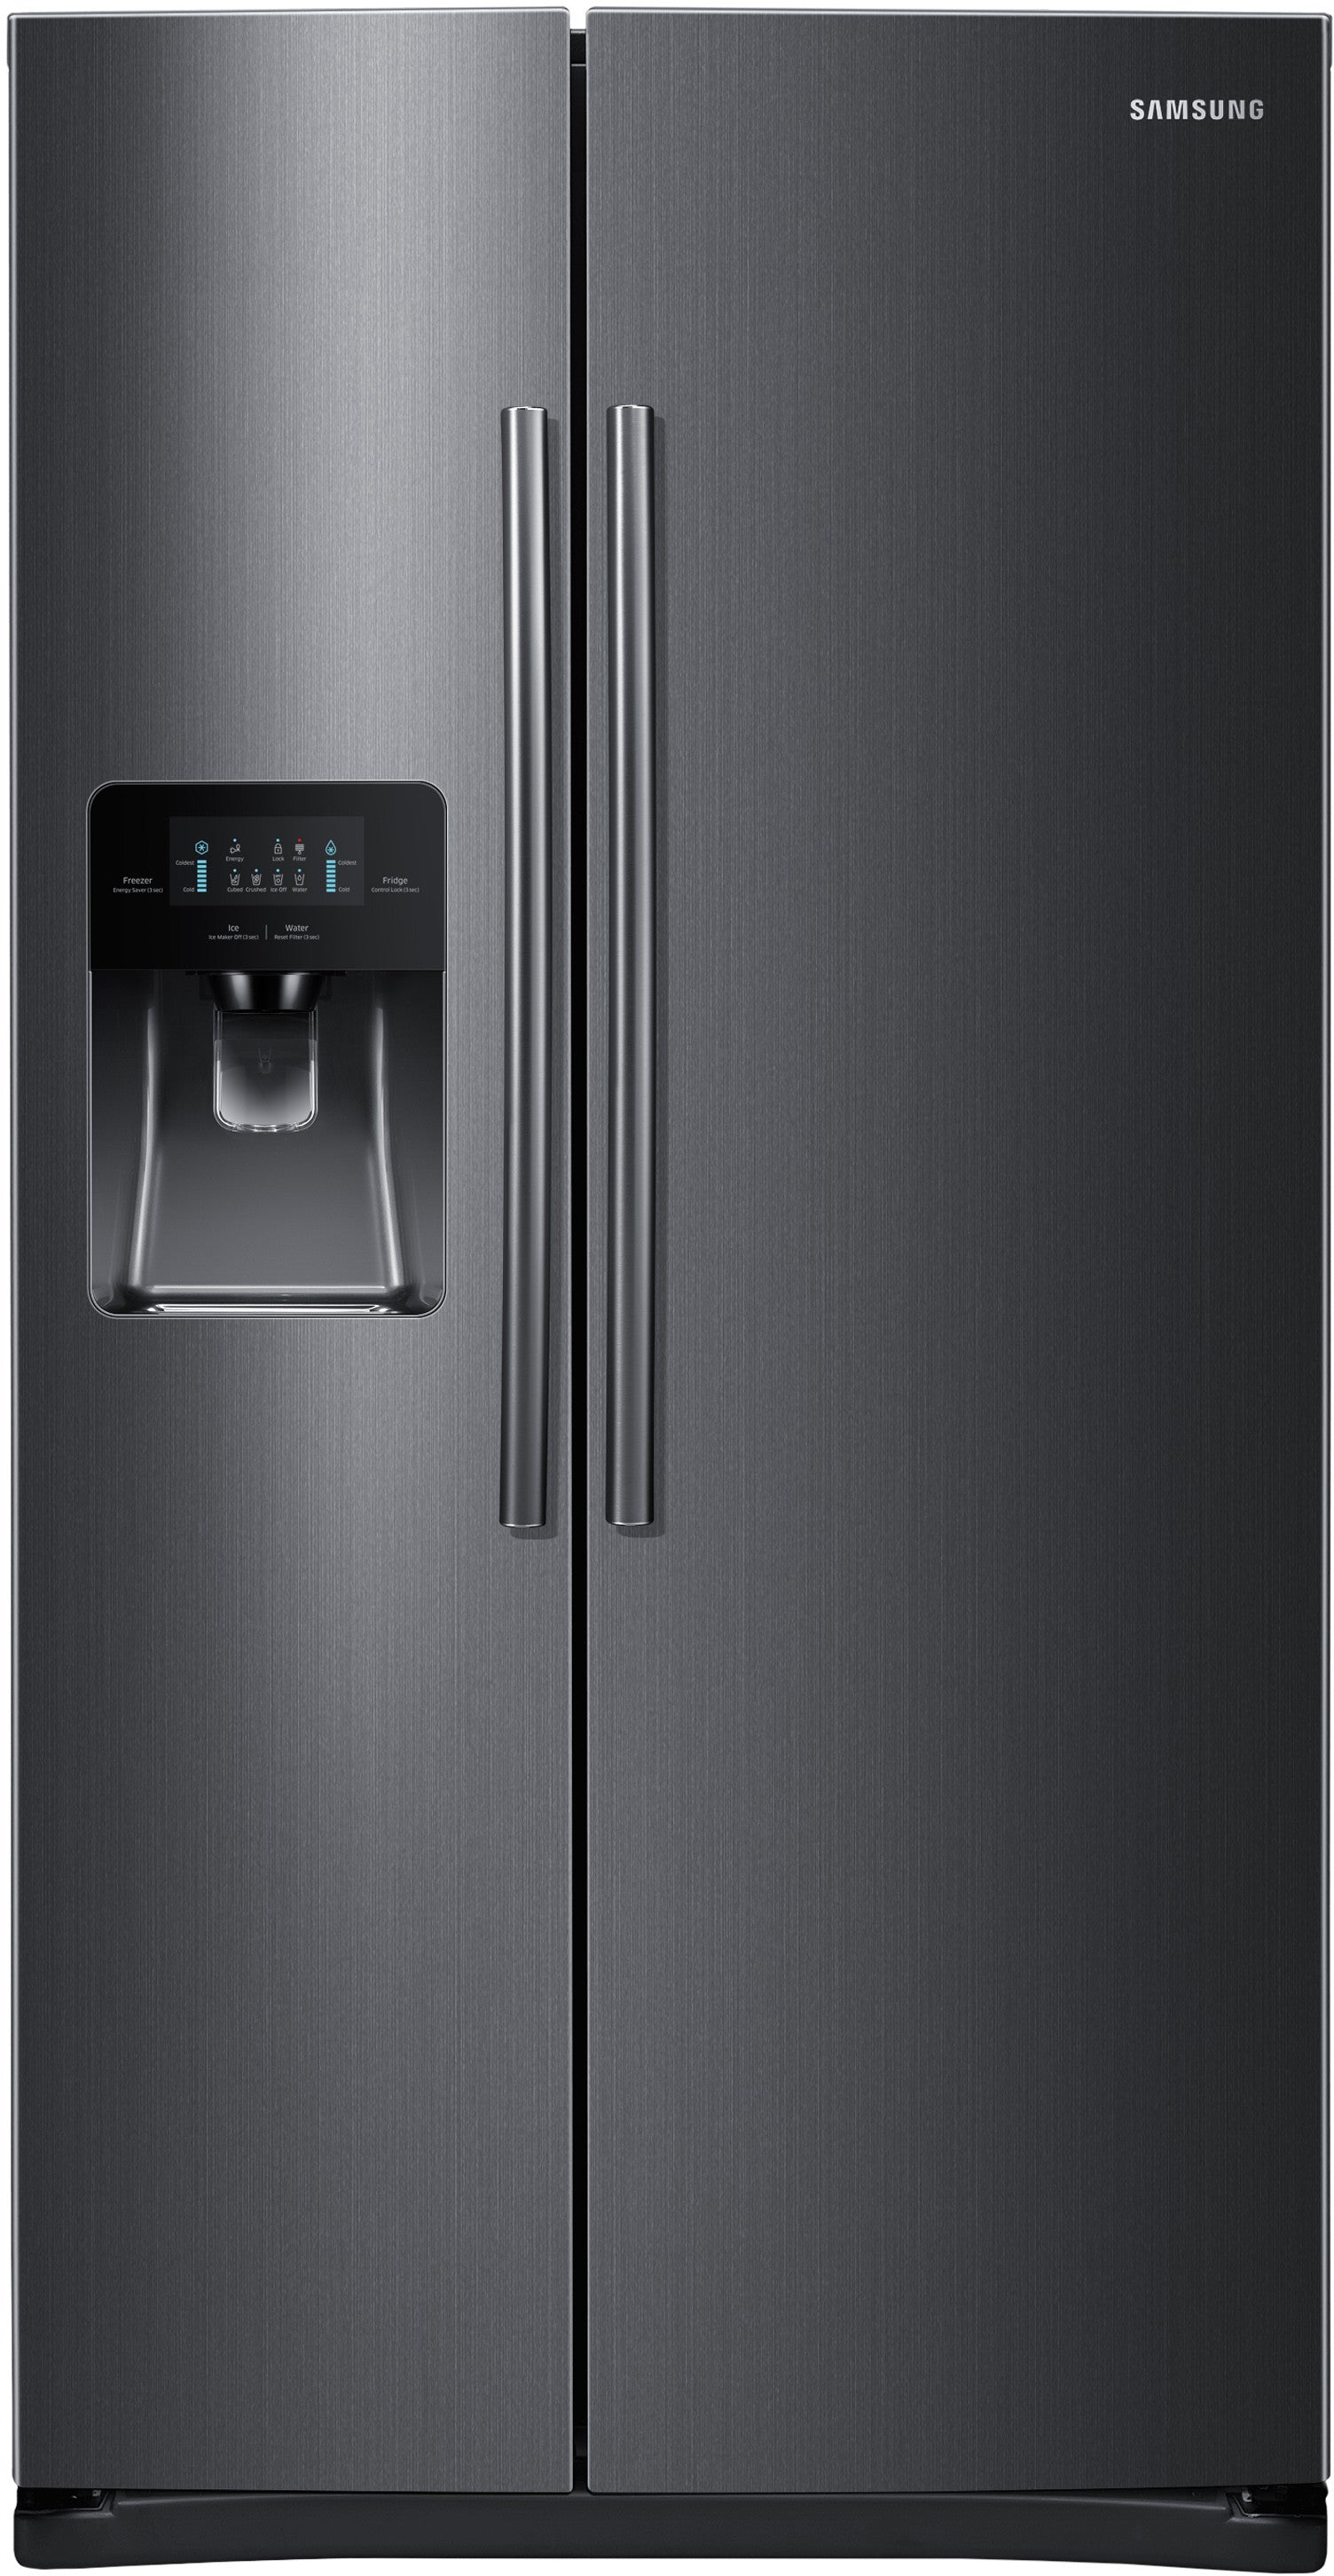 Samsung RS25H5111SG/AA 24.5 Cu. Ft. Side-by-side Refrigerator - Samsung Parts USA